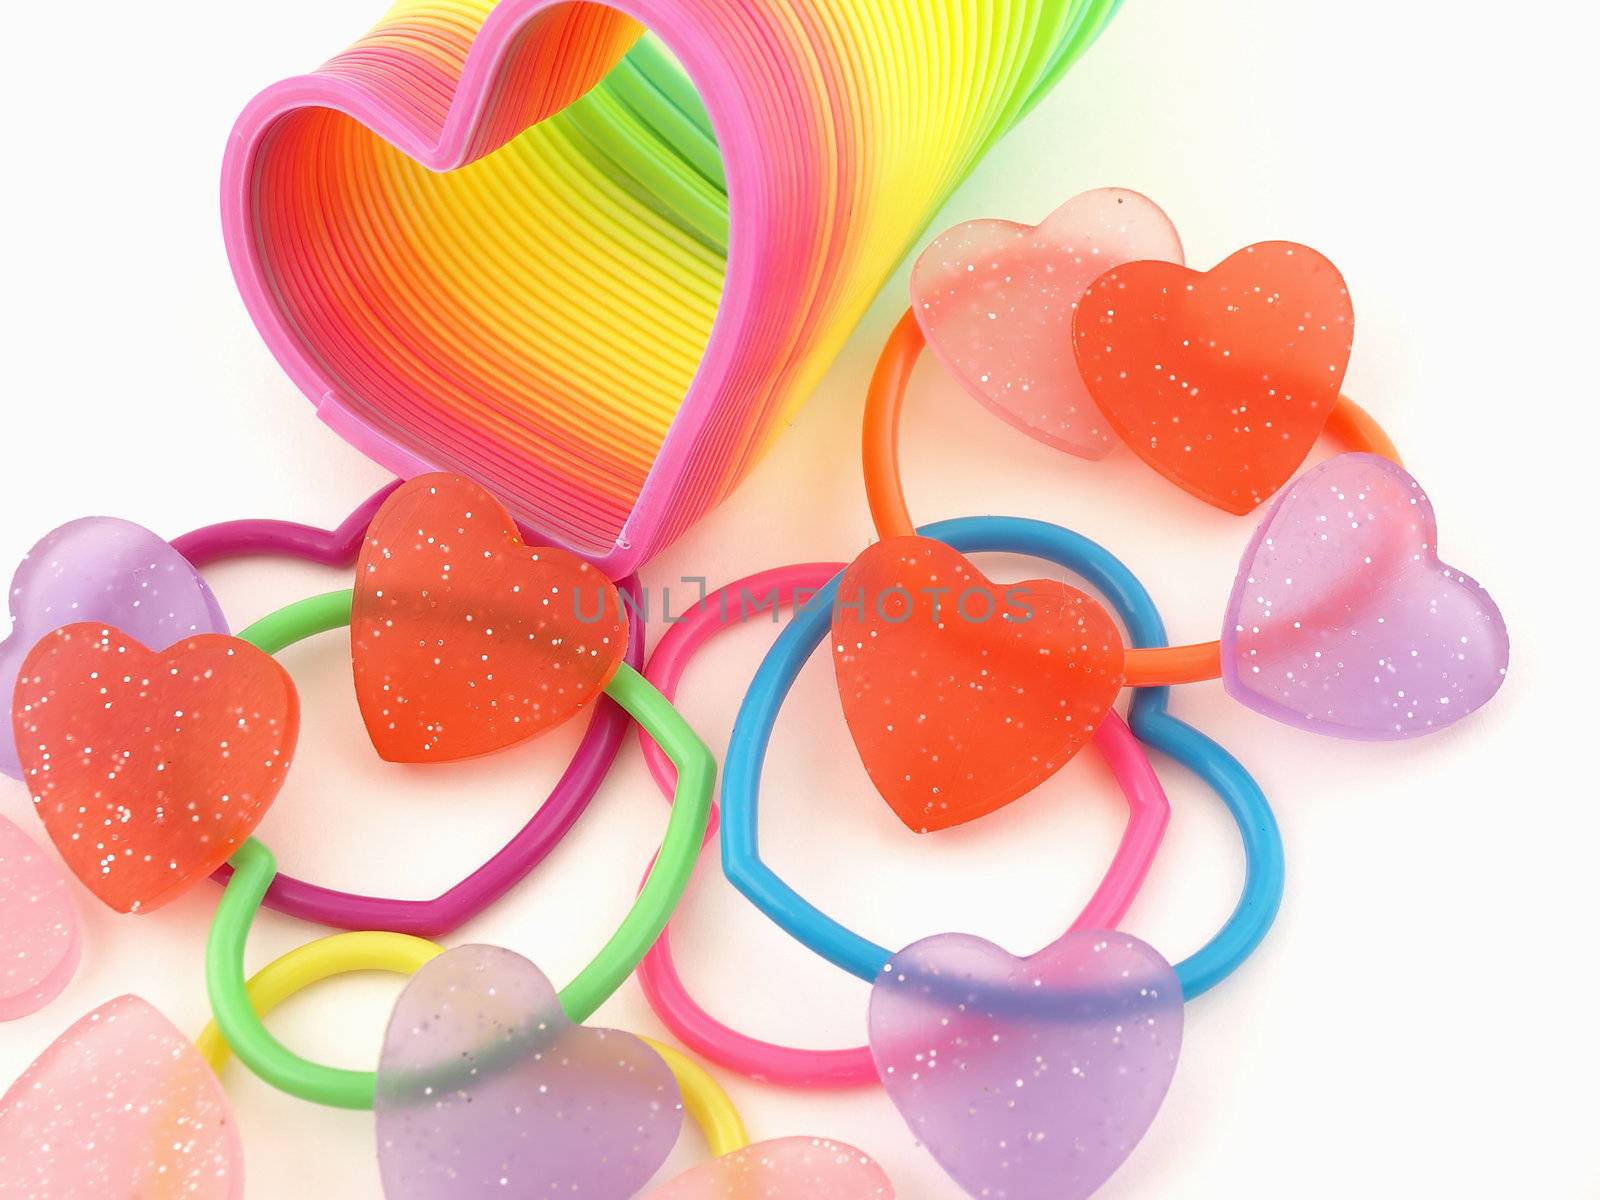 Red Hearts scattered with colorful hearts and slinky isolated on a white background